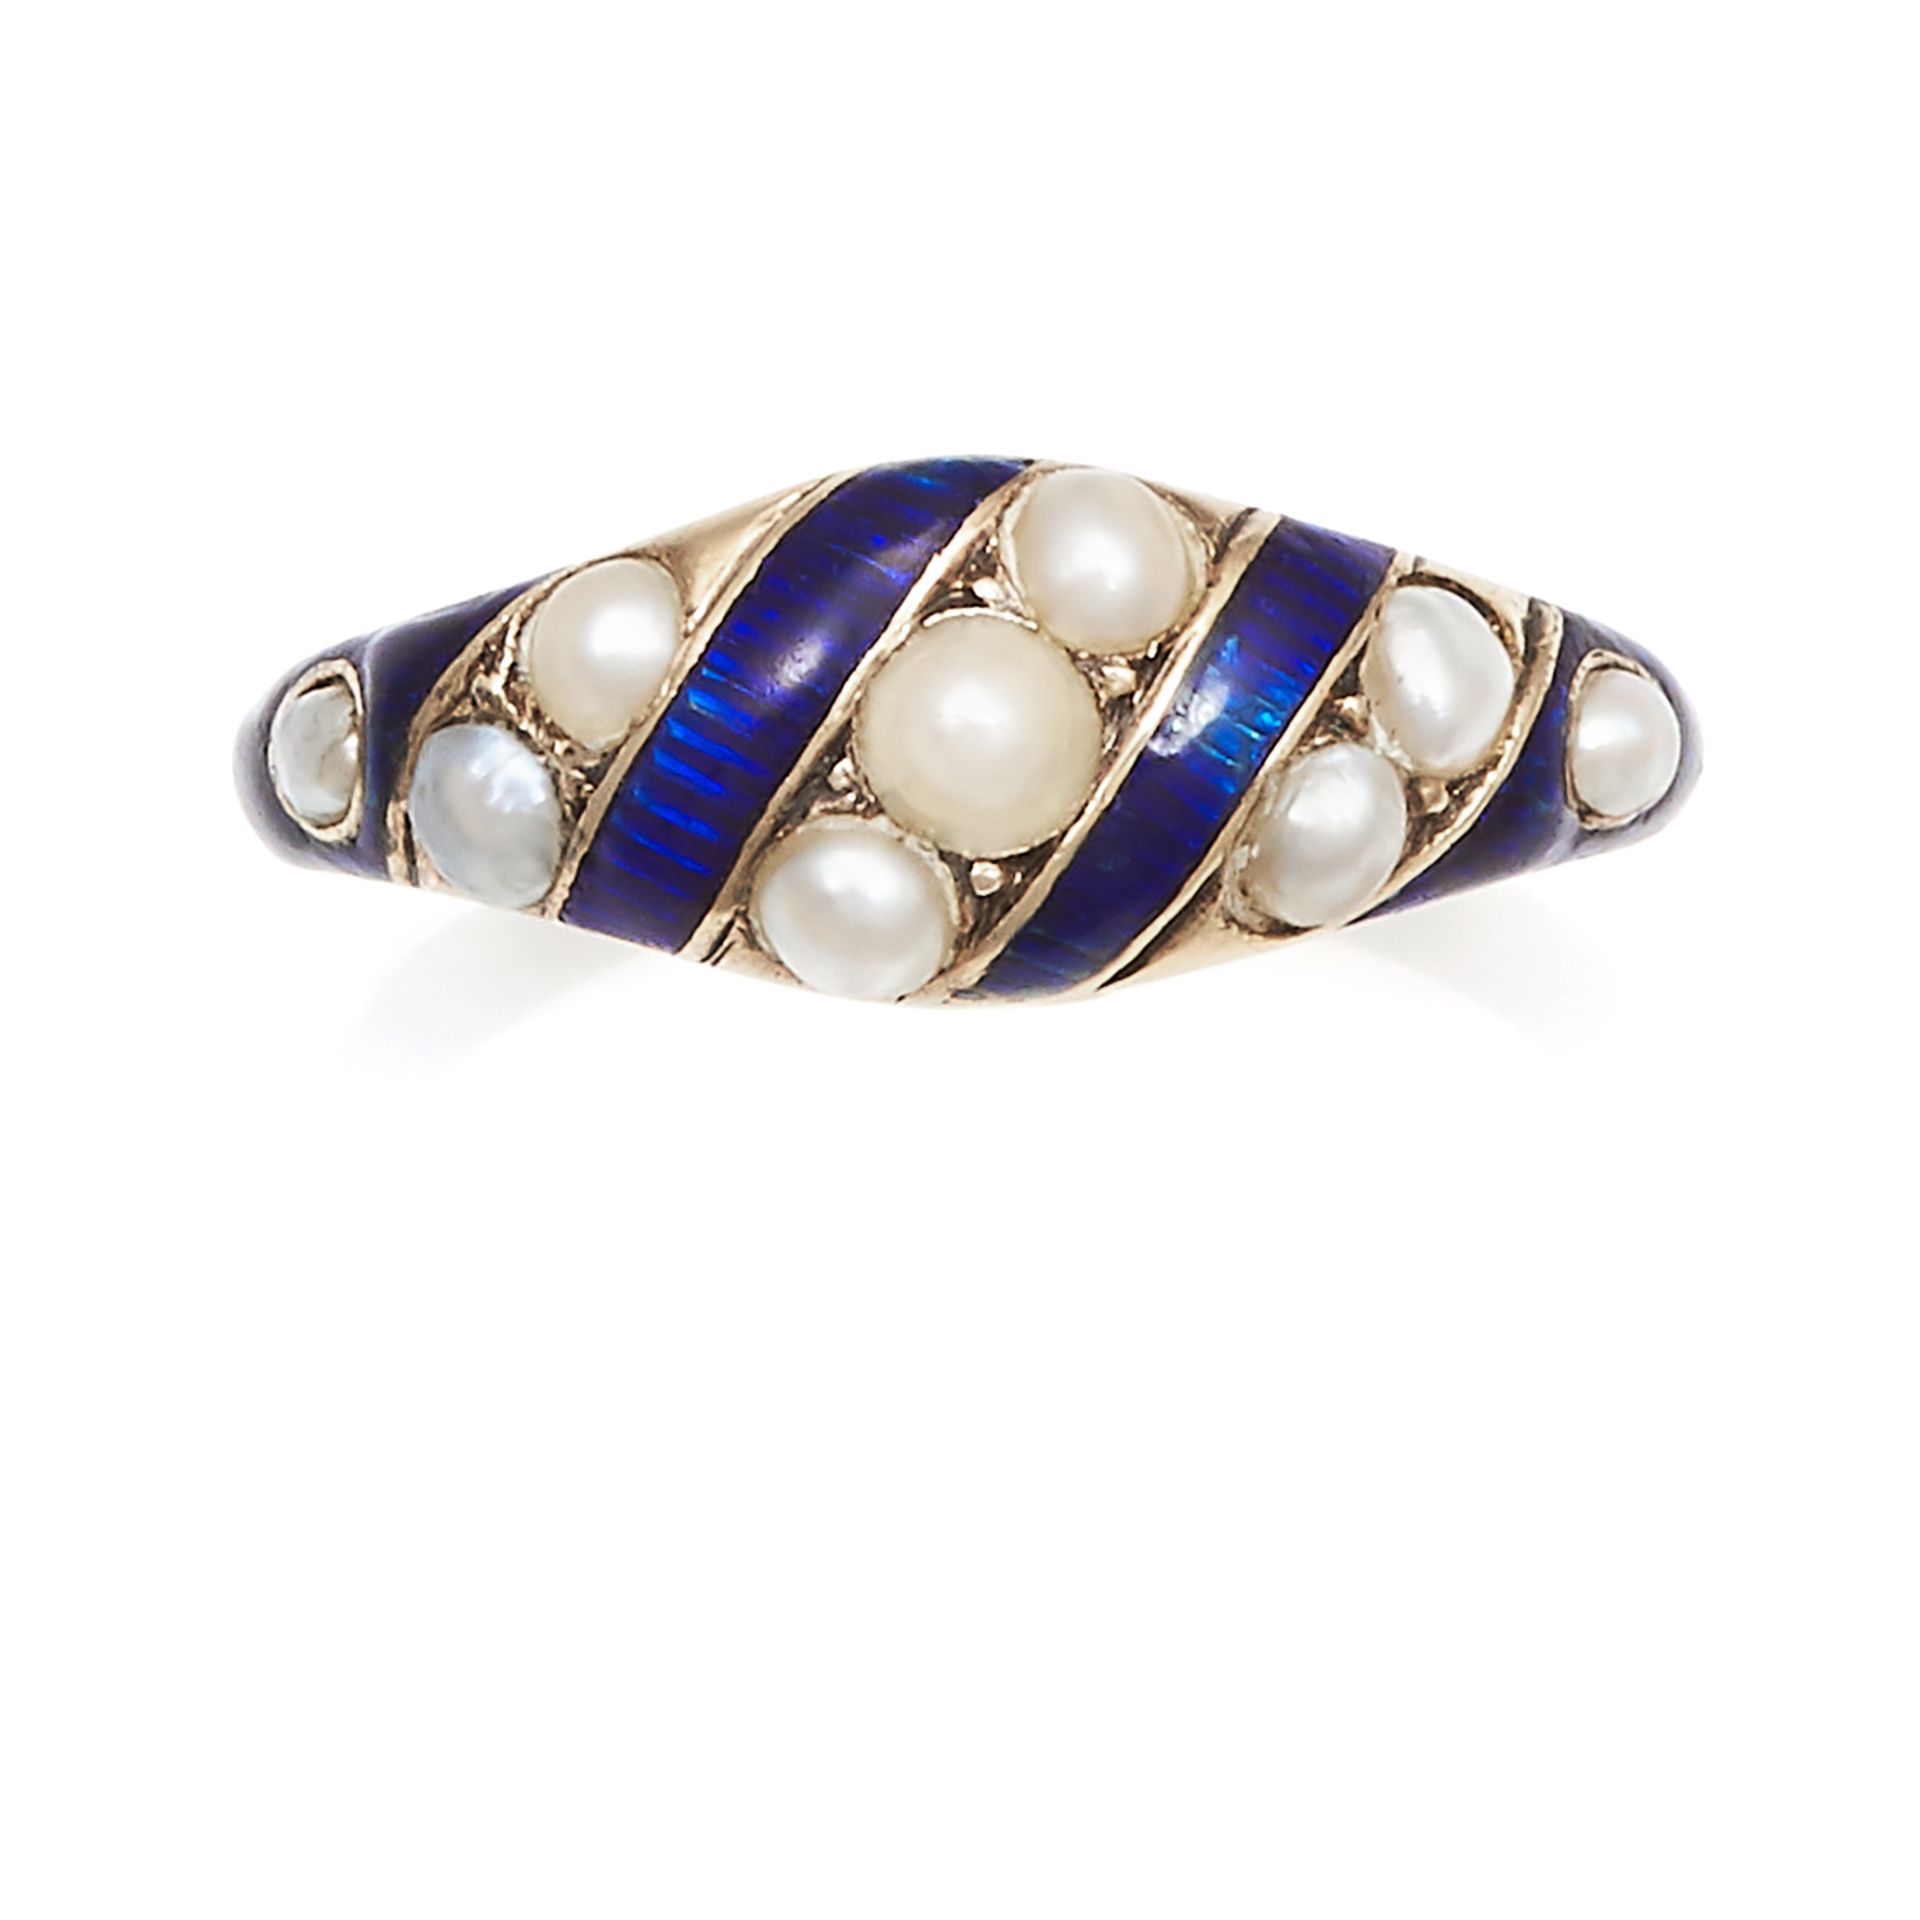 AN ANTIQUE PEARL, ENAMEL AND HAIRWORK MOURNING RING in high carat yellow gold, the bevelled body